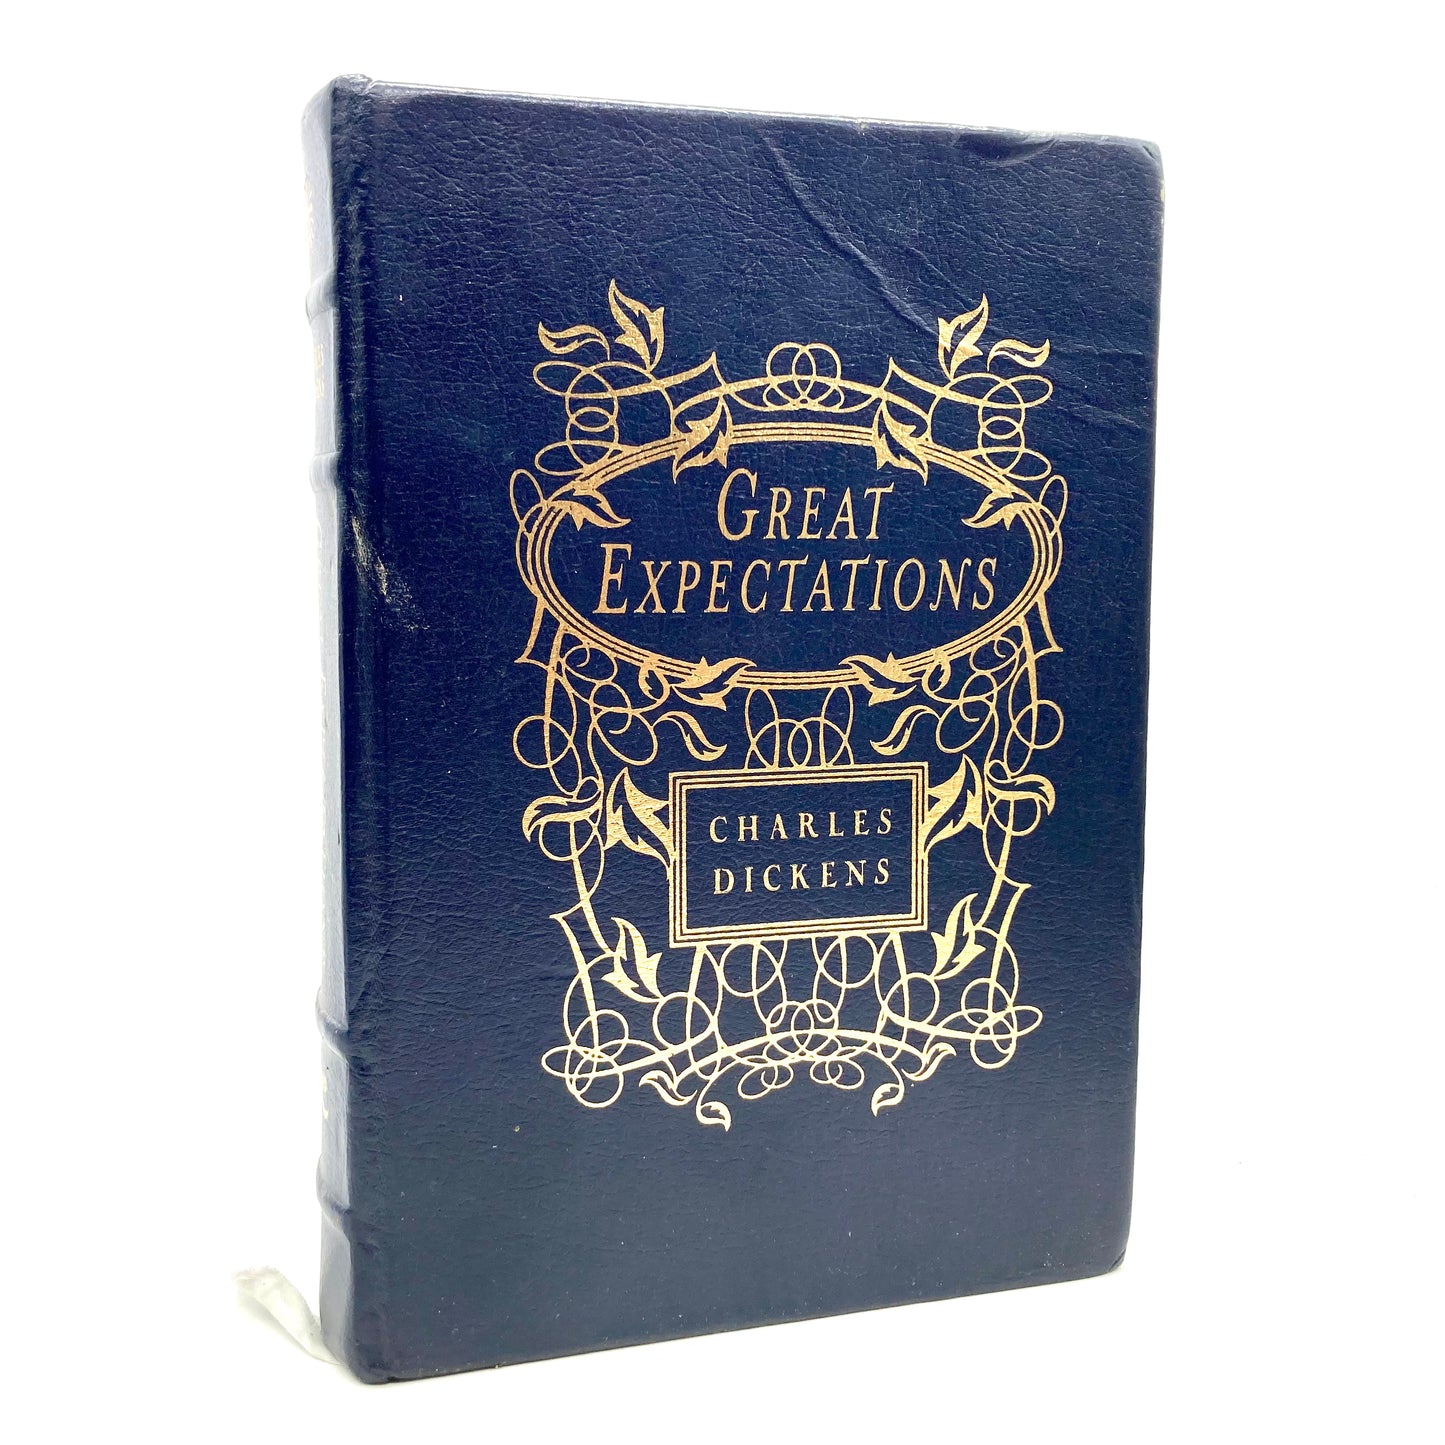 DICKENS, Charles "Great Expectations" [Sweetwater Press, 1998] - Buzz Bookstore